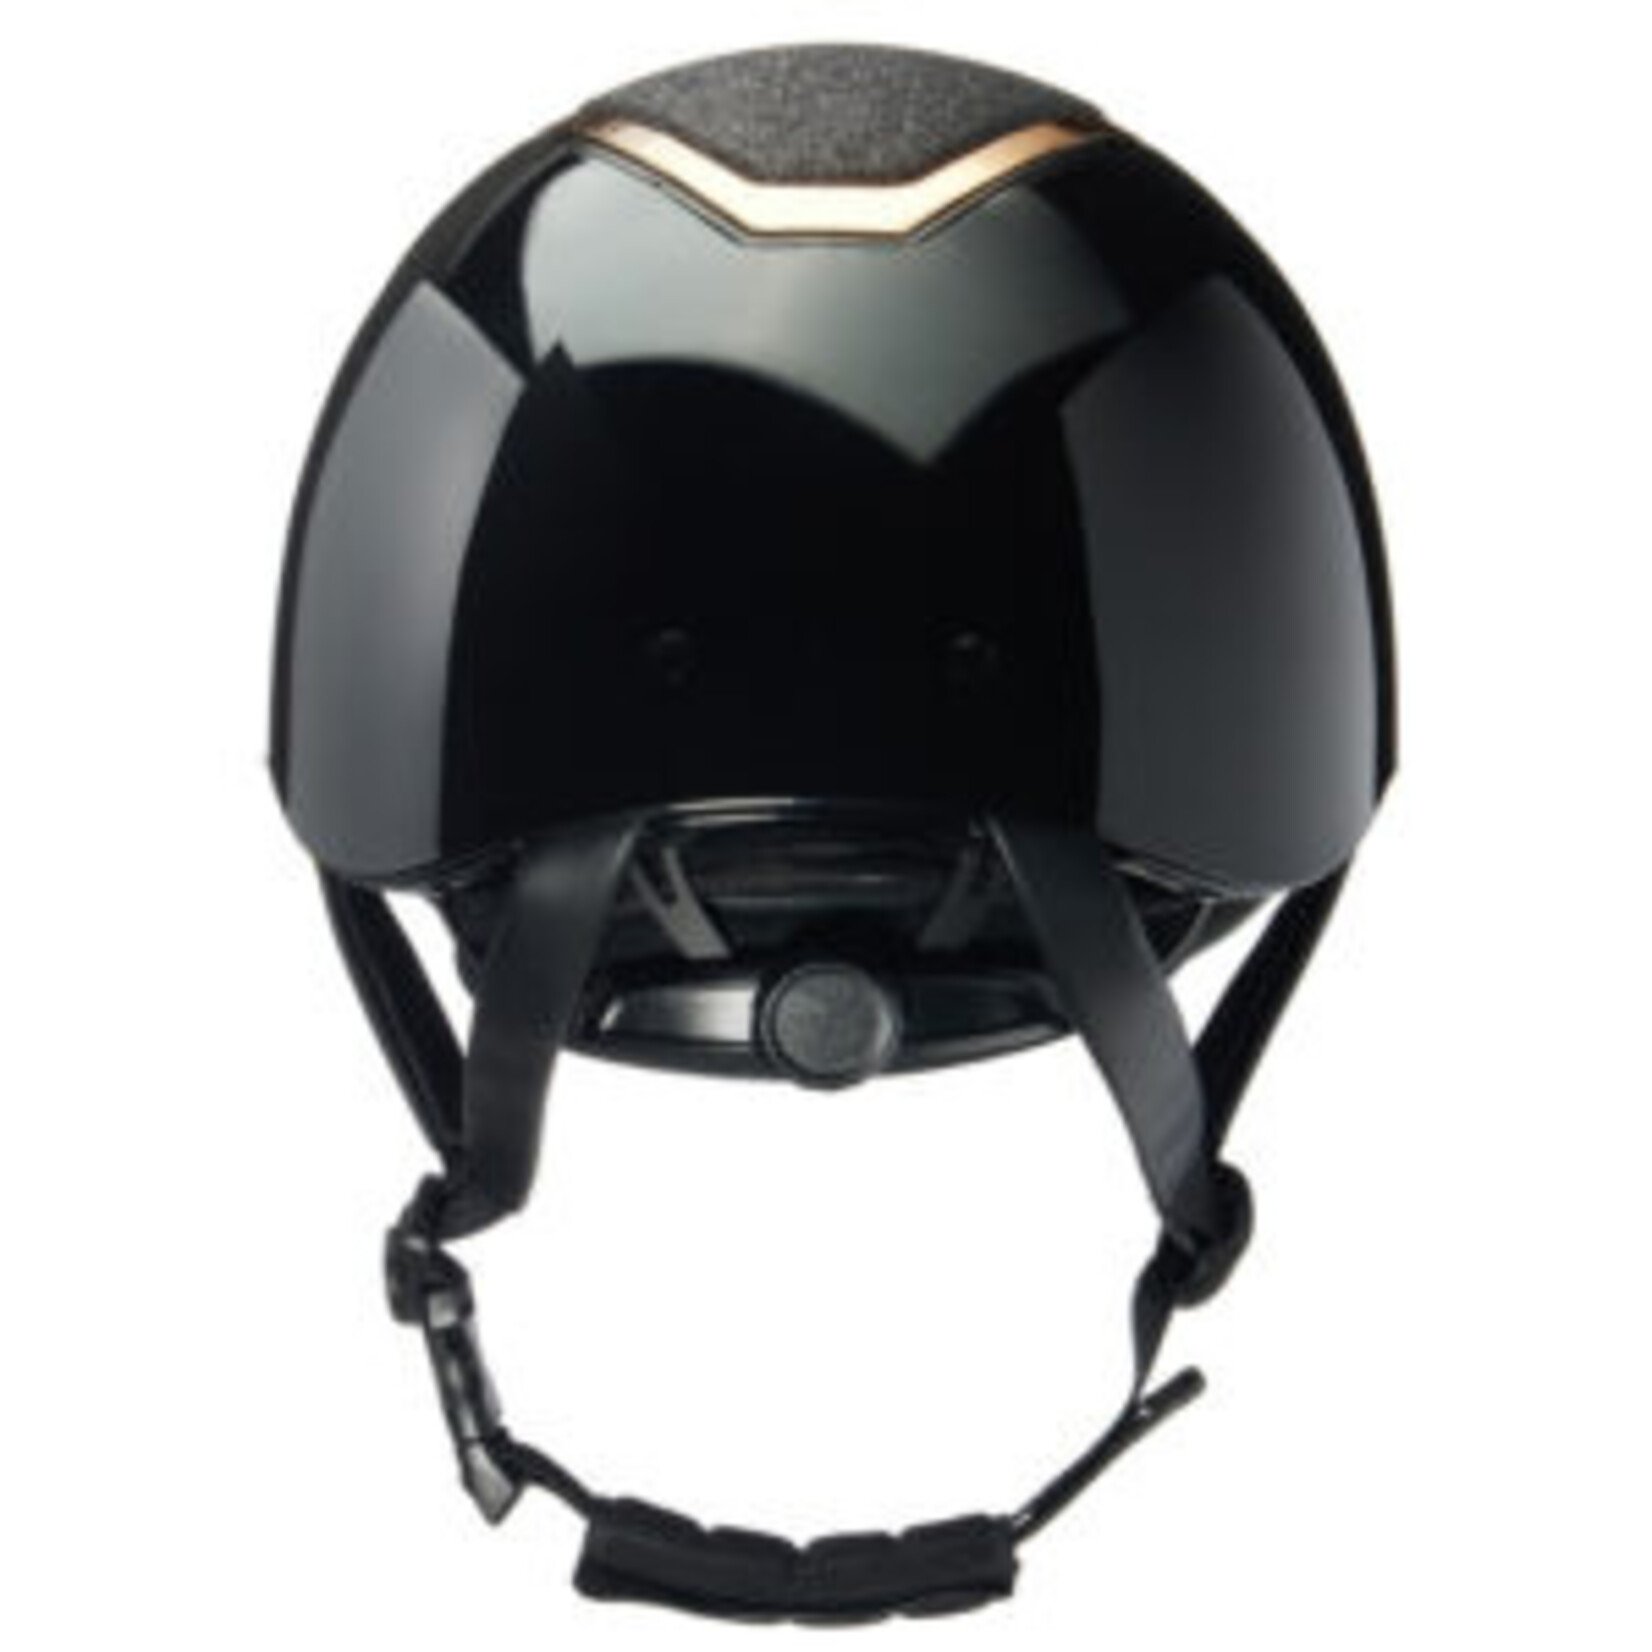 Charles Owen Kylo Riding Helmet With MYPS